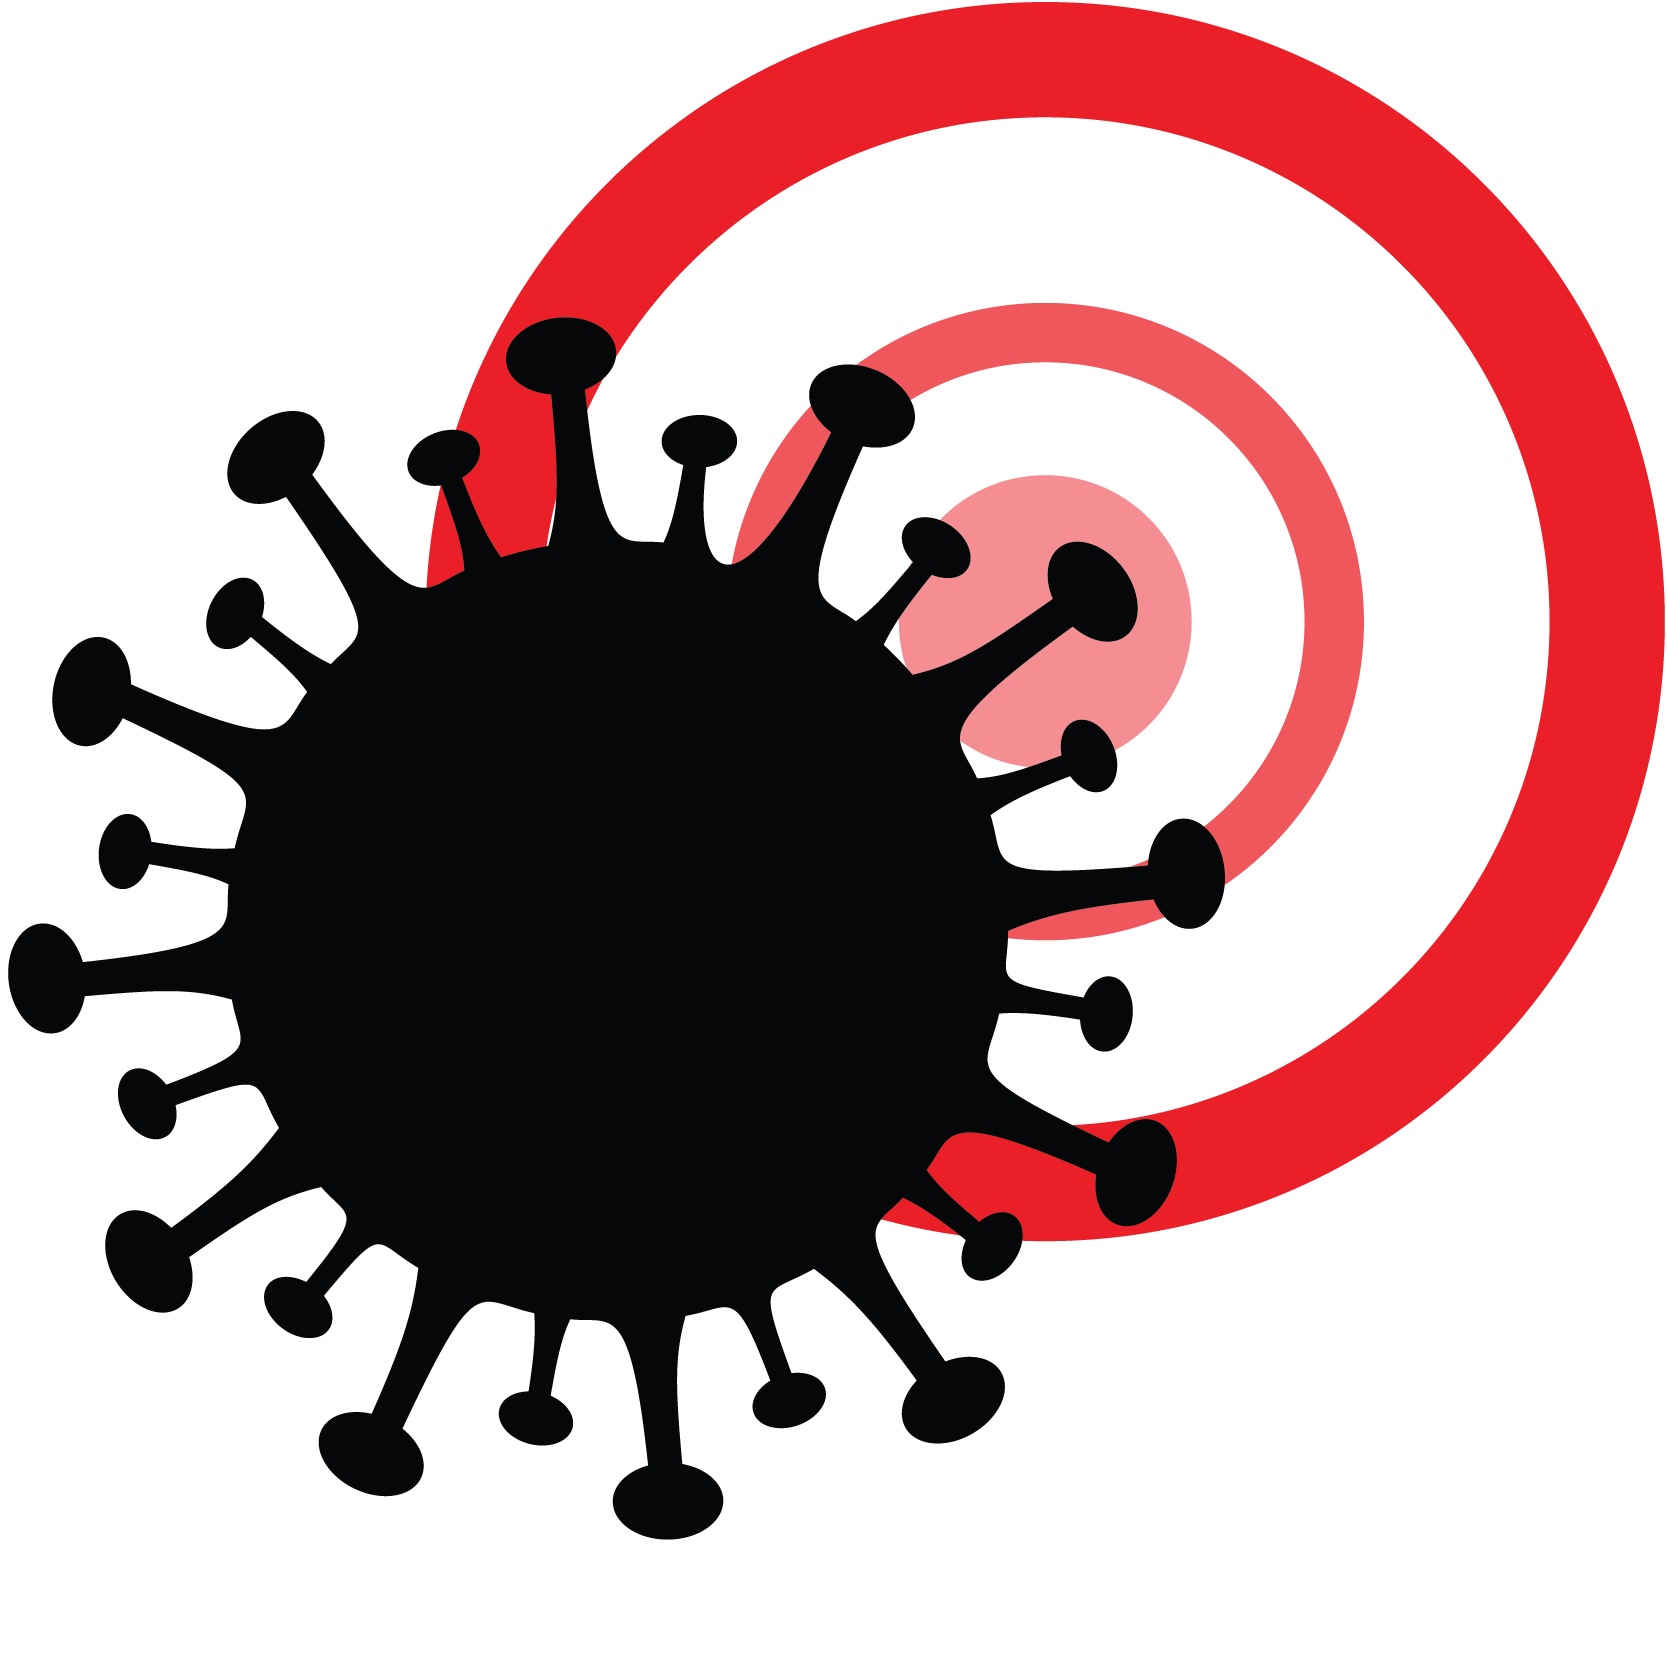 Virus icon with red circles representing disinfection services